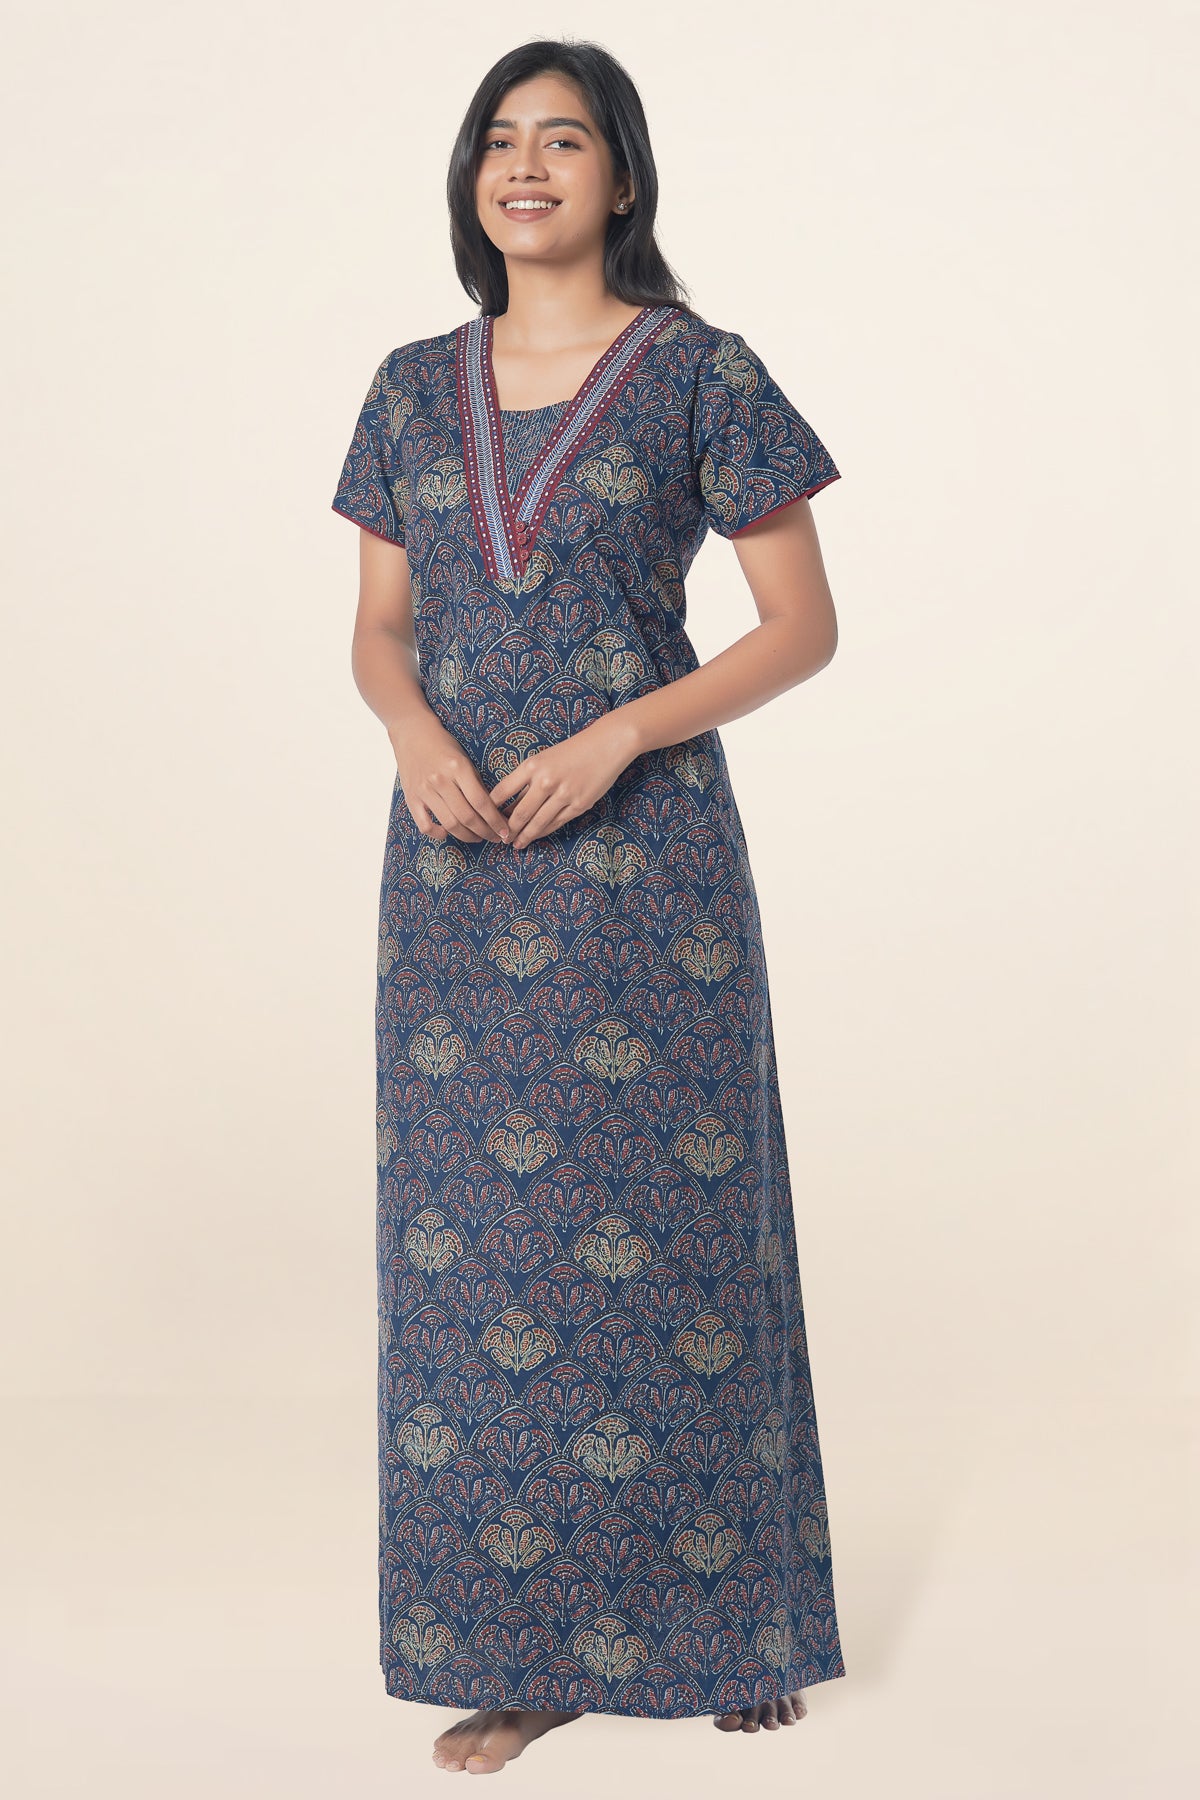 All Over Ajrak Printed With Yoke Embroidered Nighty Blue